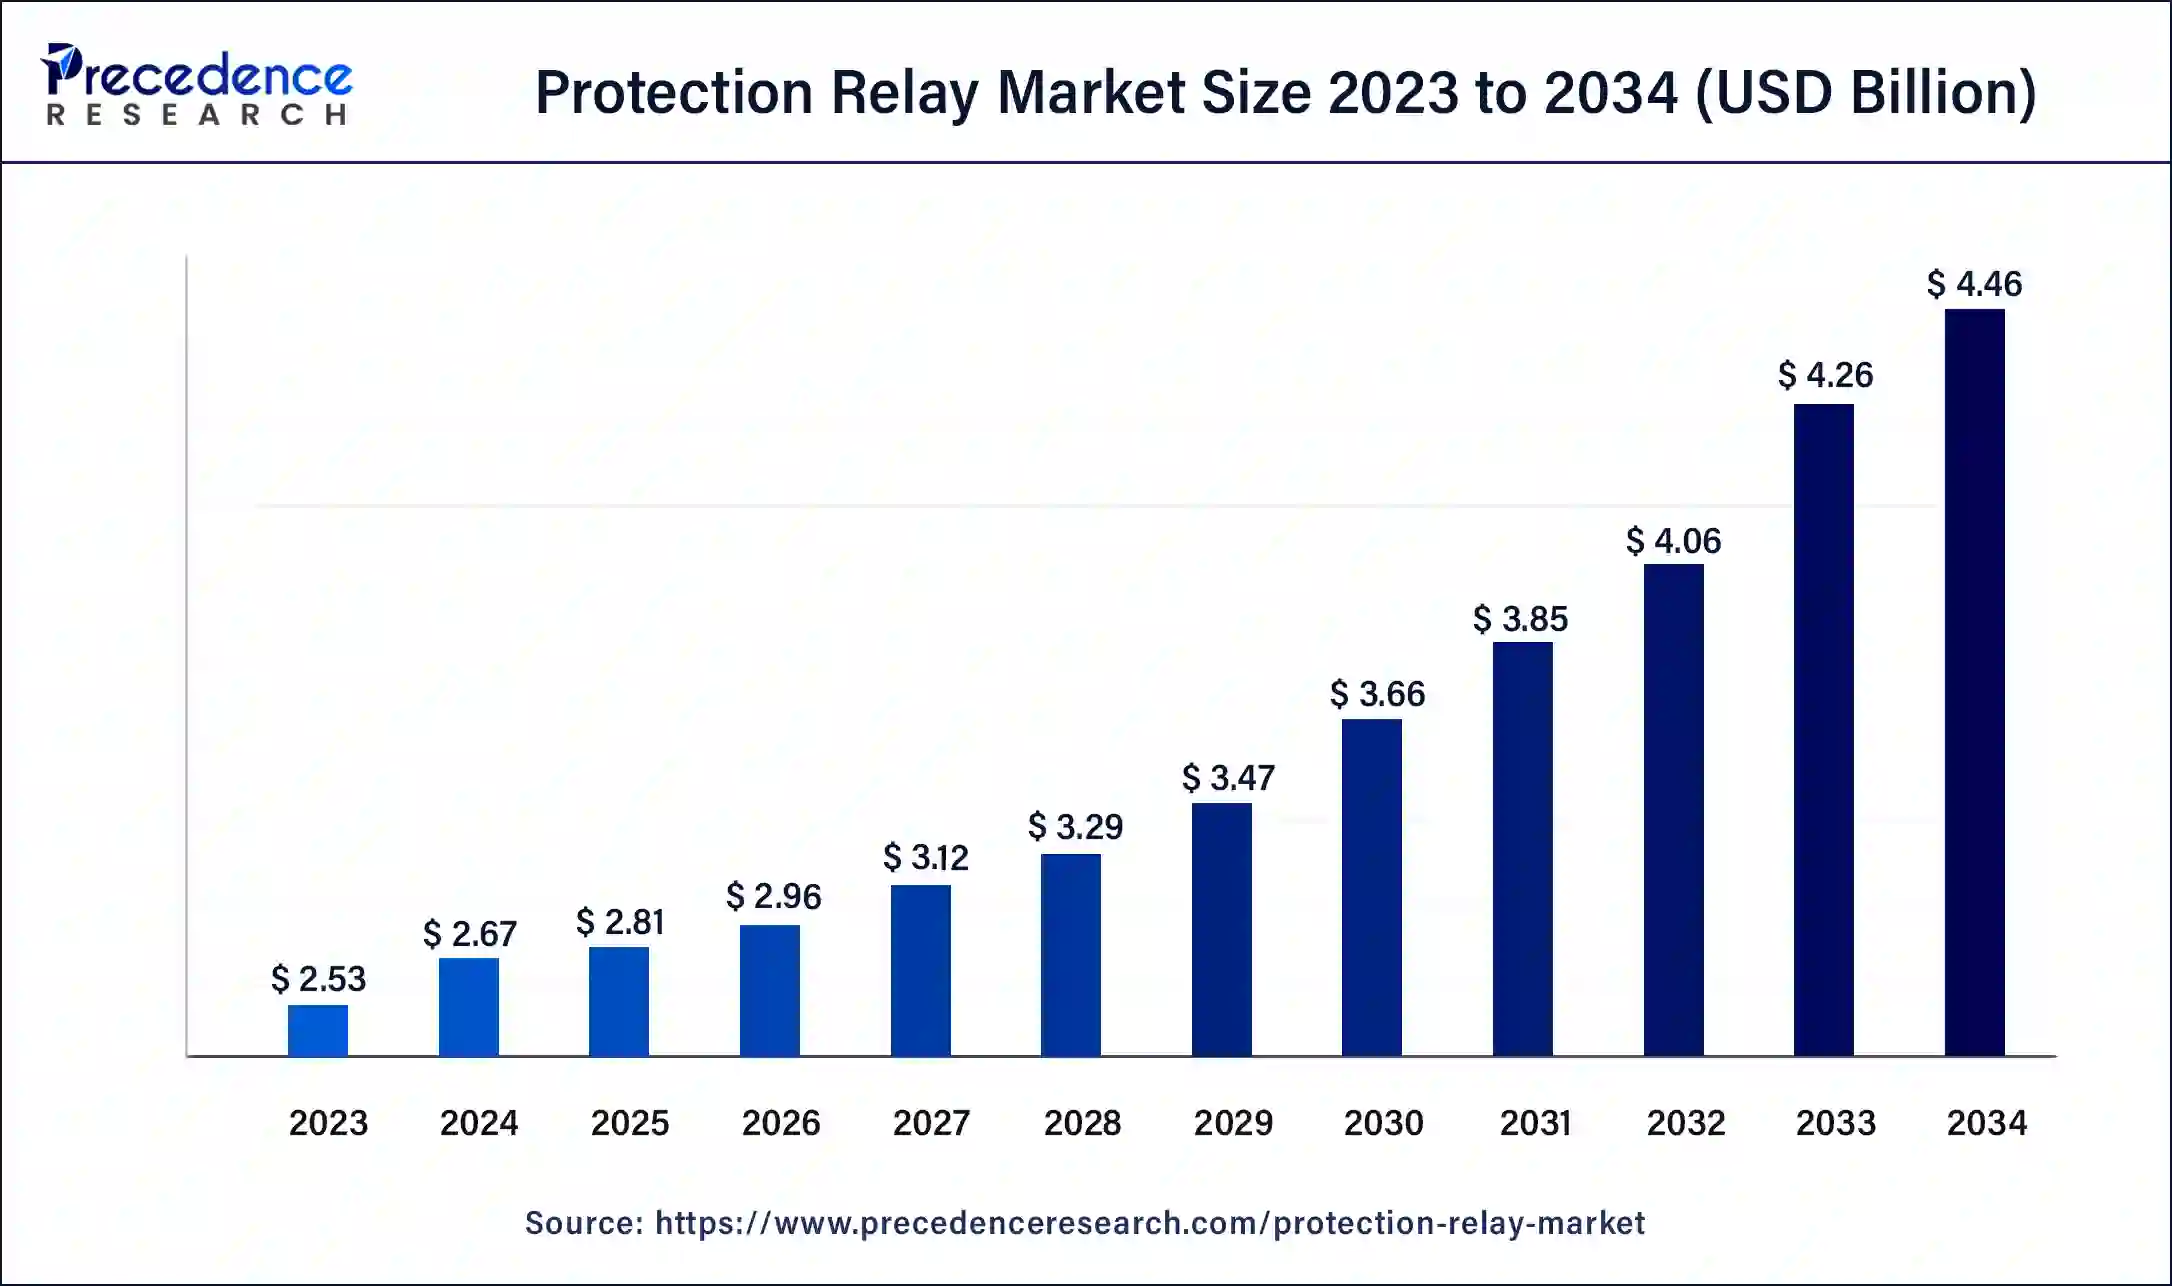 Protection Relay Market Size 2024 to 2034